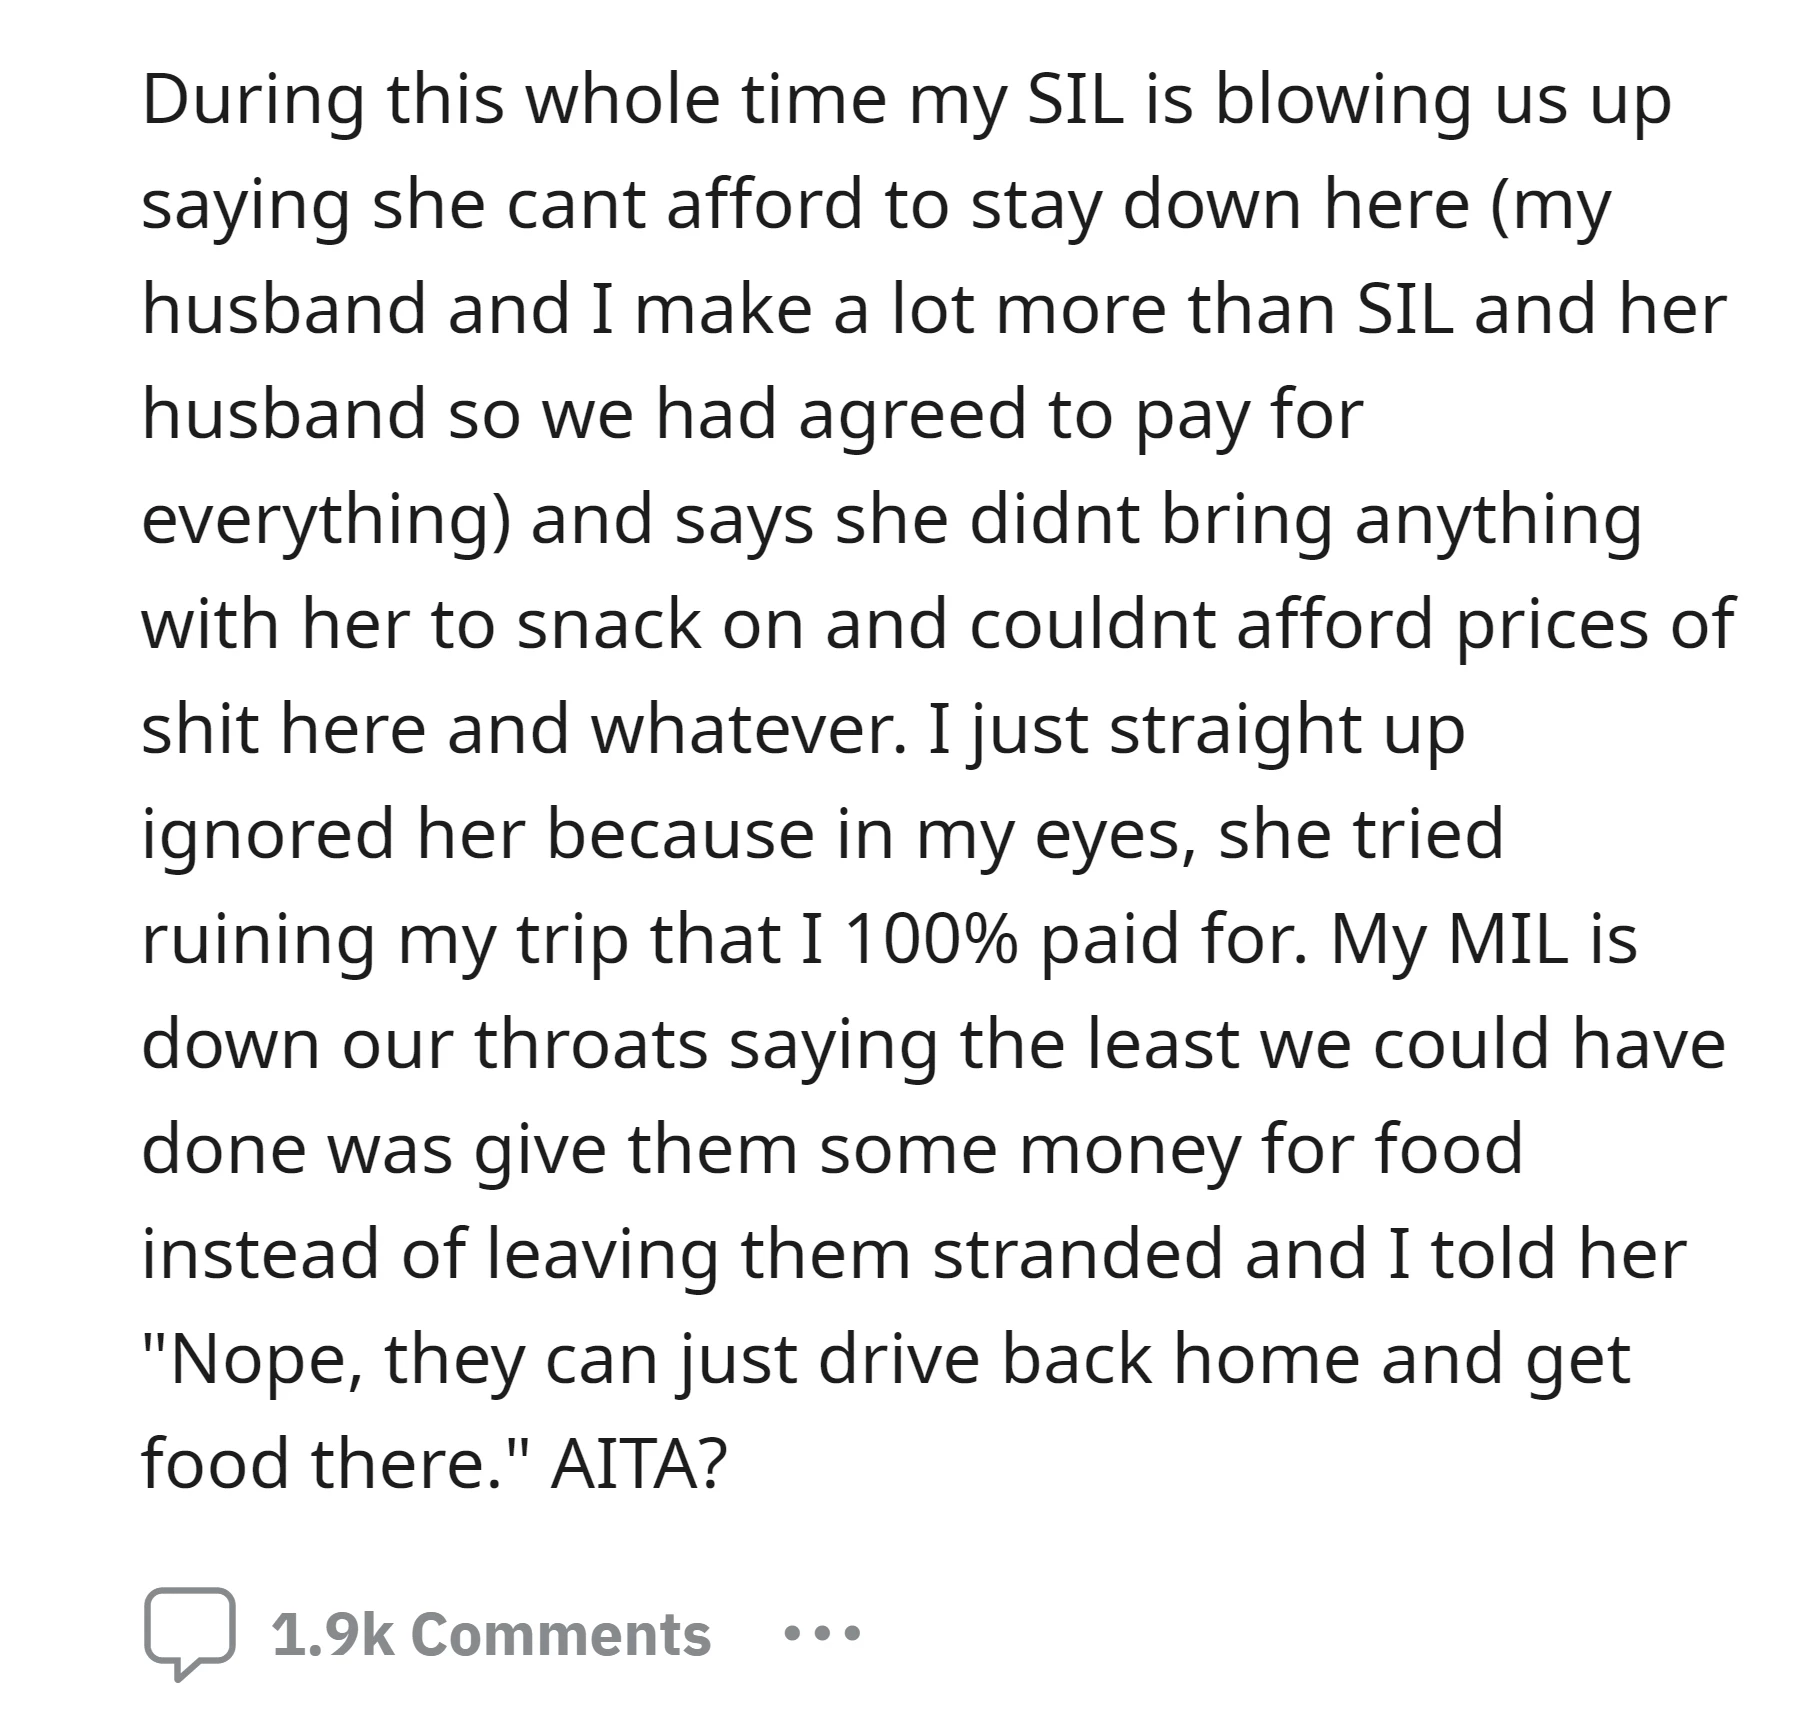 OP covering all expenses, but the MIL still criticized her for not helping with food costs